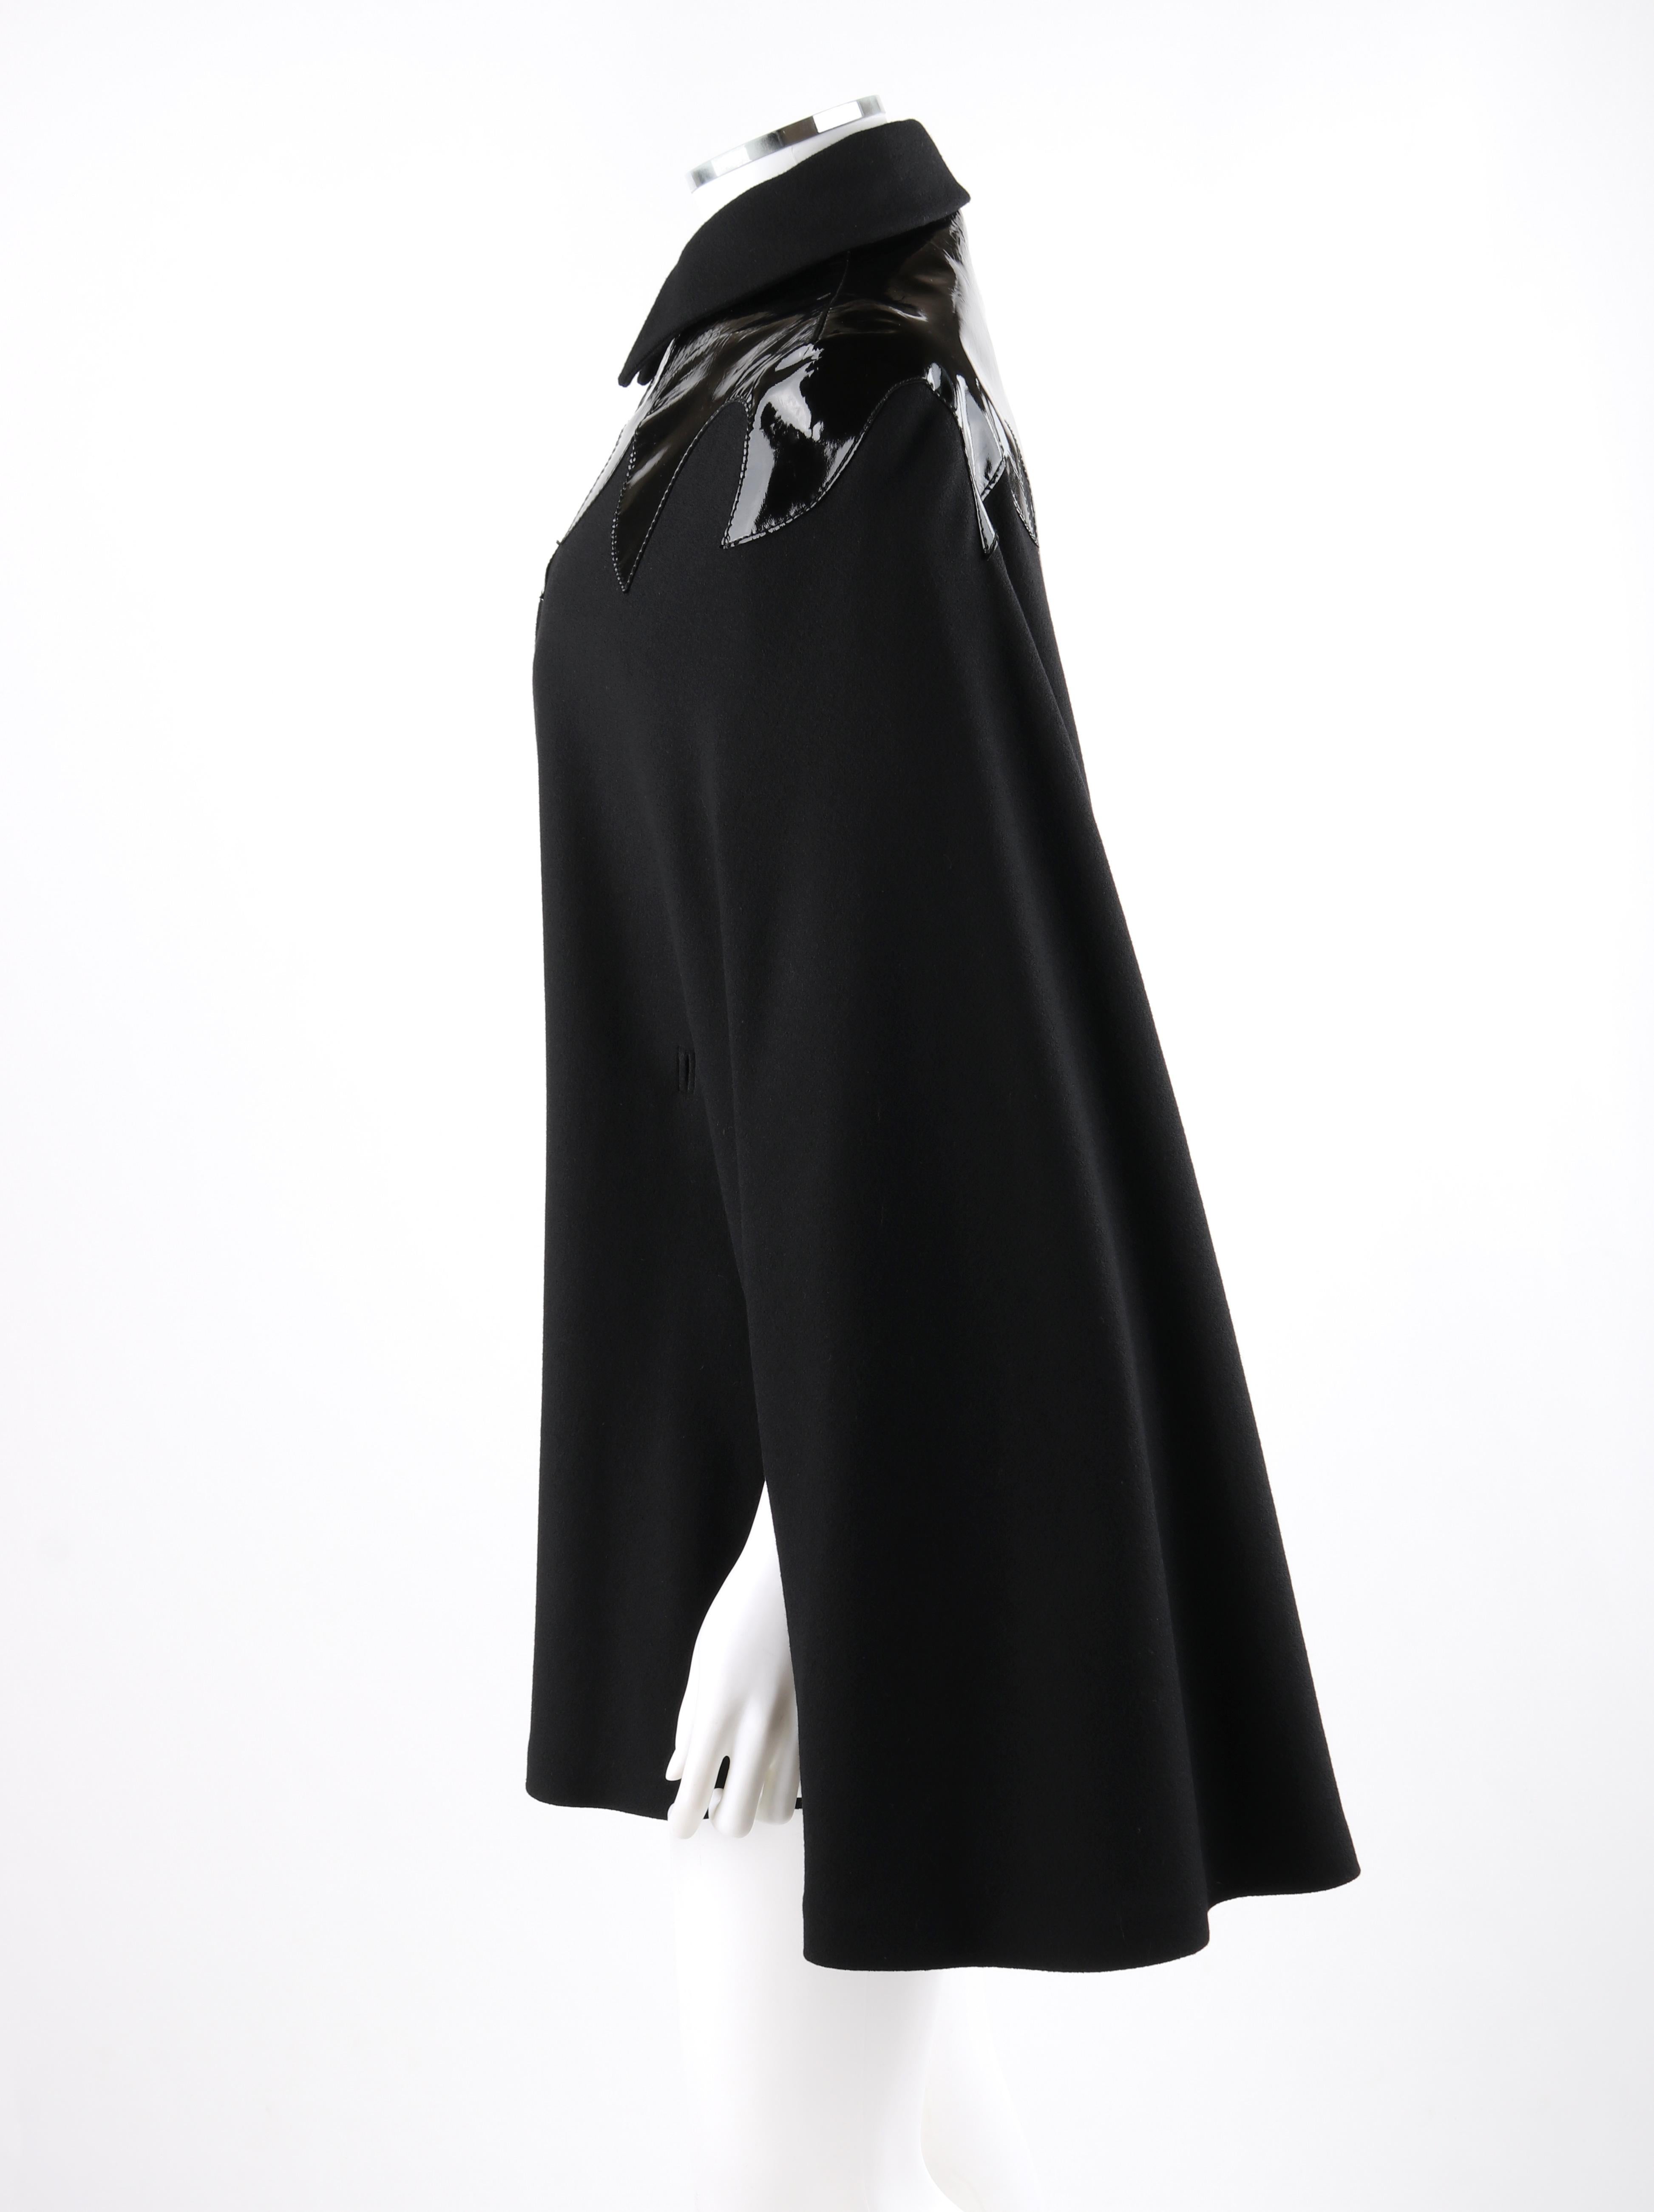 Women's ALEXANDER McQUEEN A/W 2007 “Witches” Black Wool Patent Leather Mantel Cape Coat